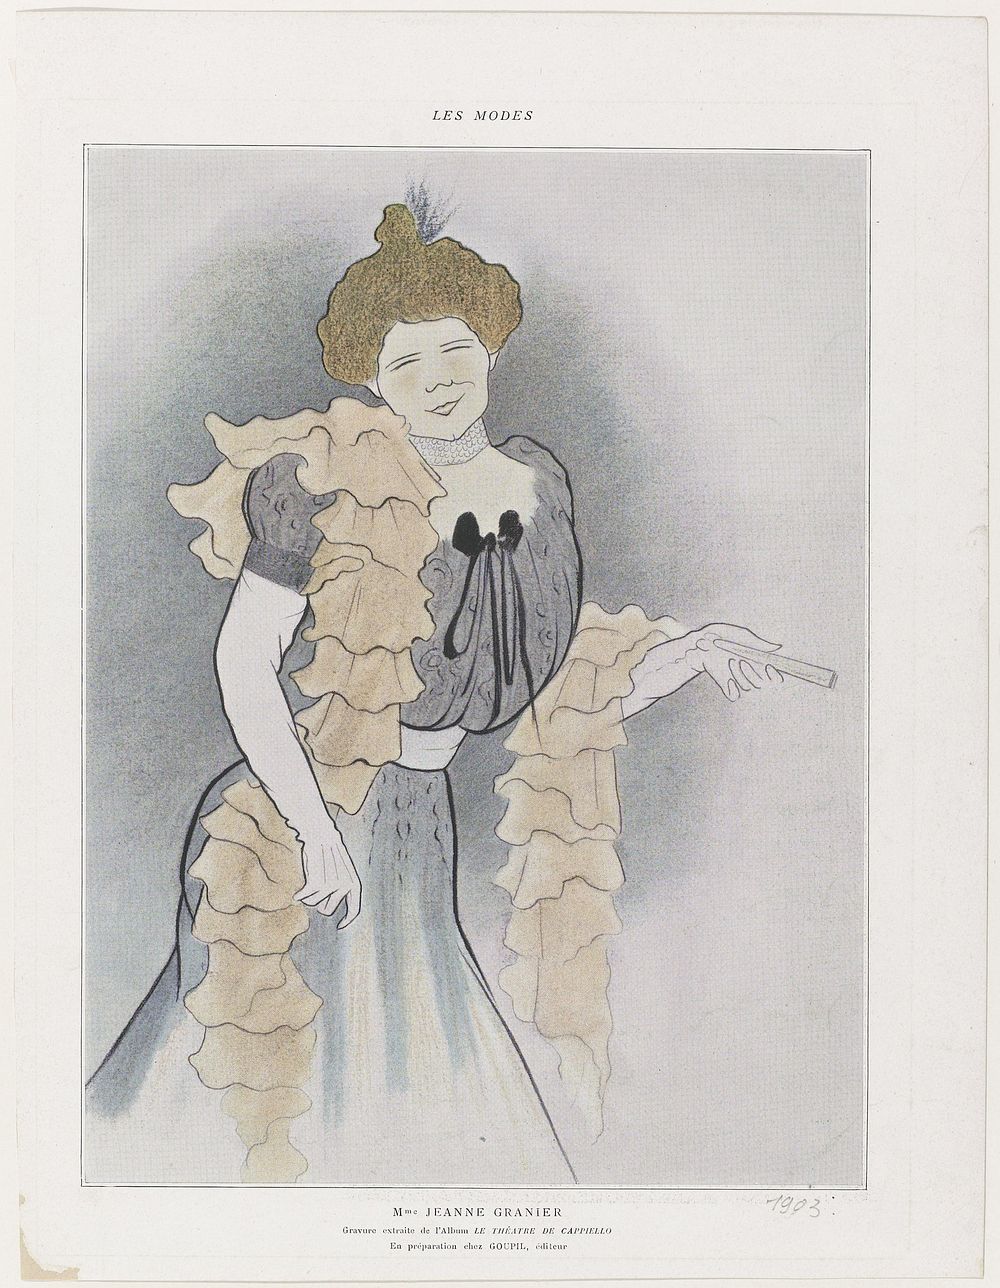 Les Modes, 1903 : Mme Jeanne Granier (...) (1903) by anonymous and Goupil and Cie